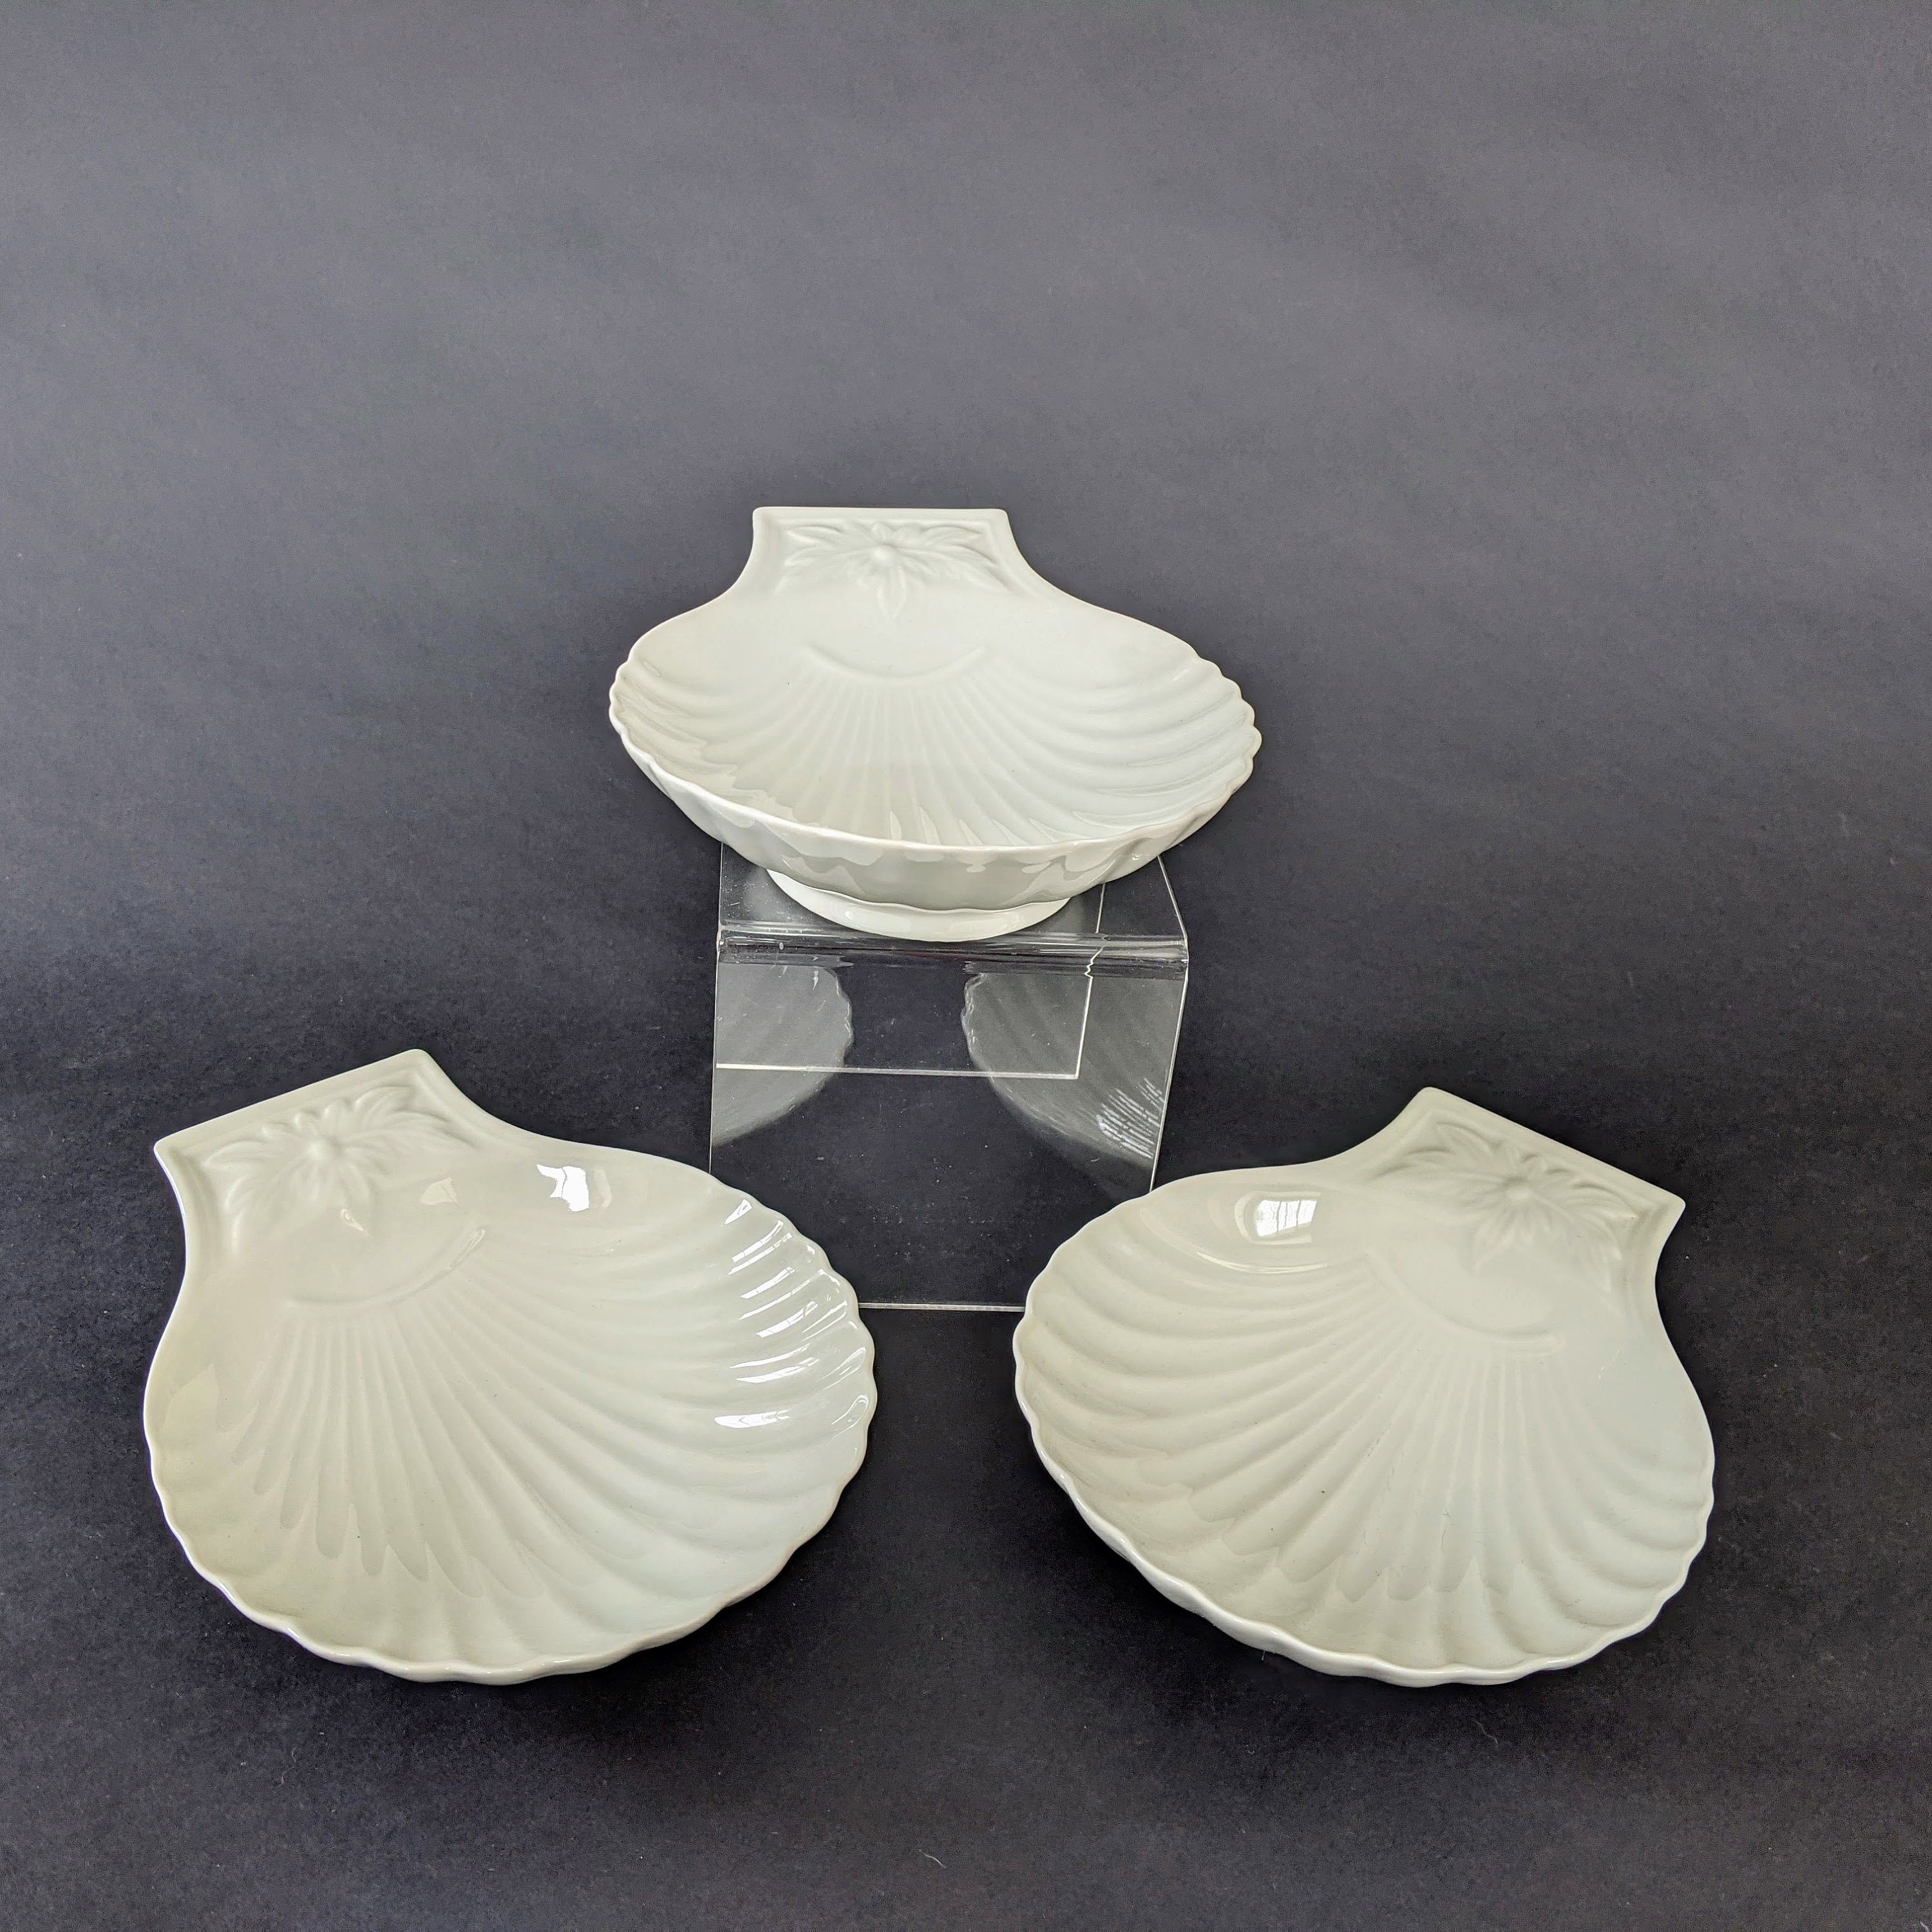 3 Apilco Classic Whiteware Scallop Shell Shaped Dishes Bowls Floral Embossed 6 1/2 Made in France